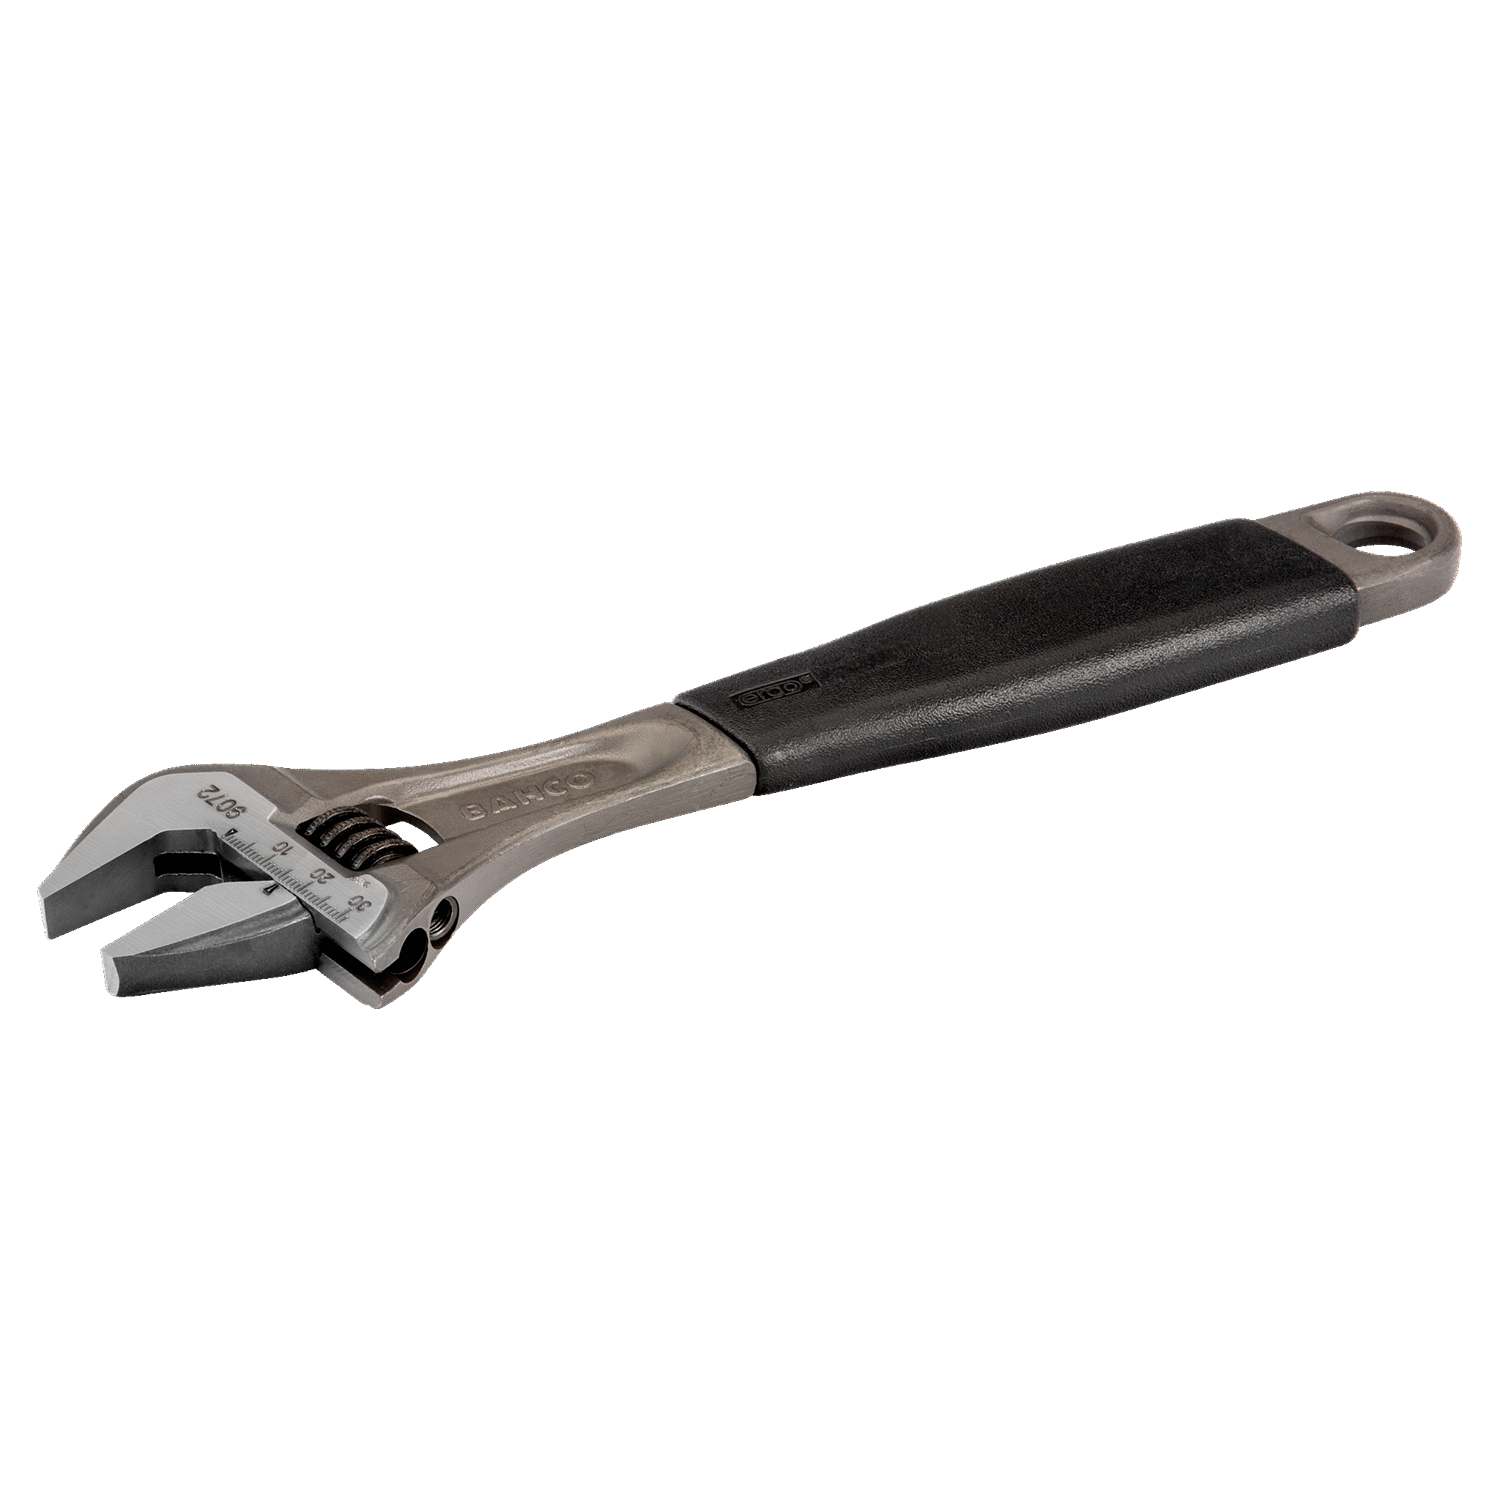 BAHCO 90 ERGO Central Nut Adjustable Wrench with Rubber Handle - Premium Adjustable Wrench from BAHCO - Shop now at Yew Aik.